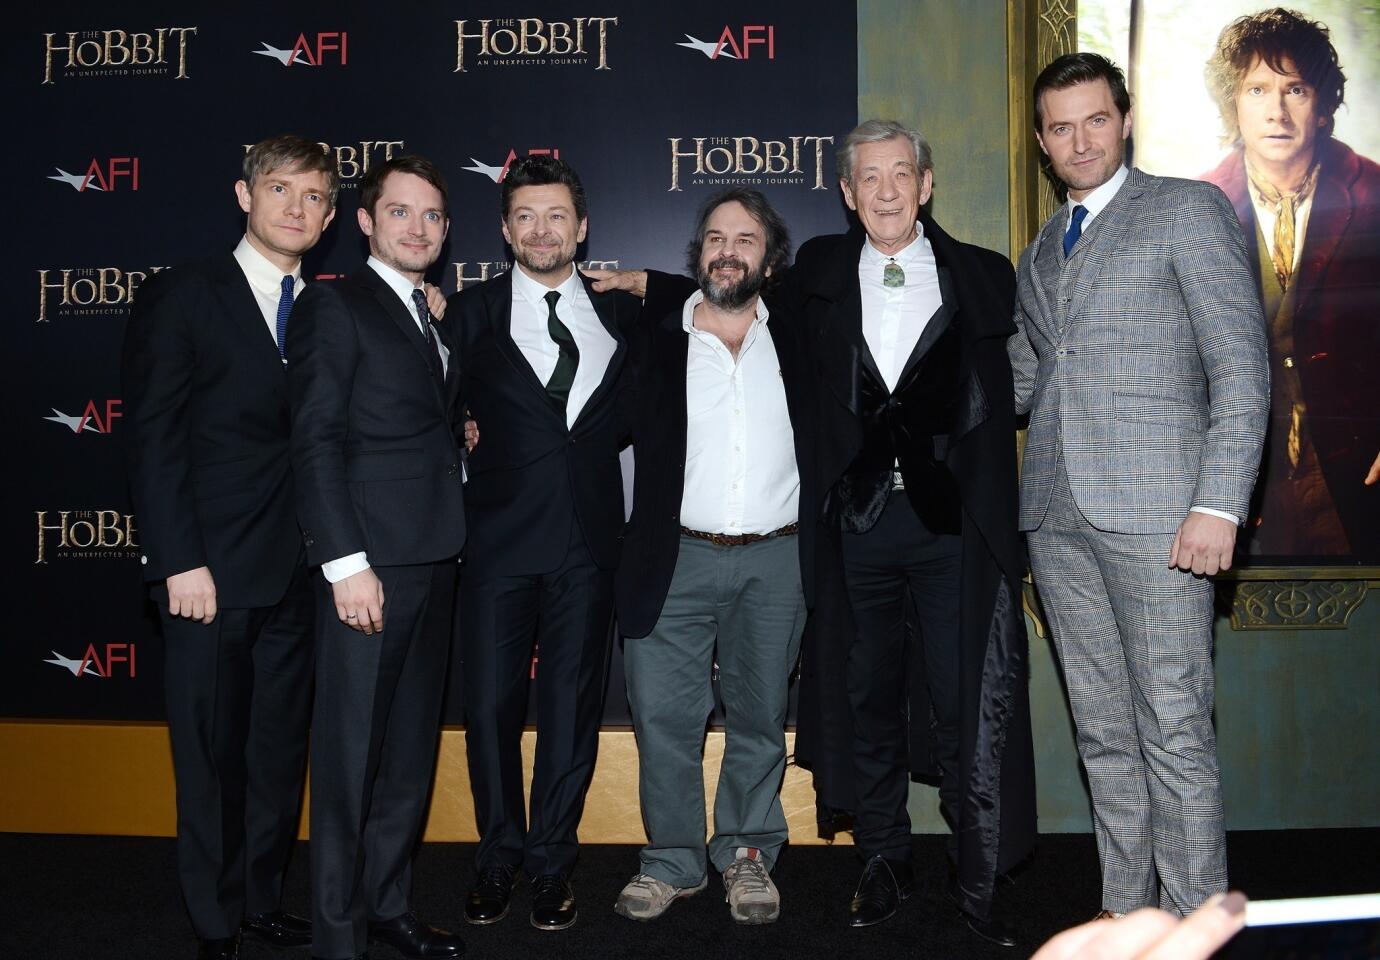 'The Hobbit: An Unexpected Journey' New York premiere